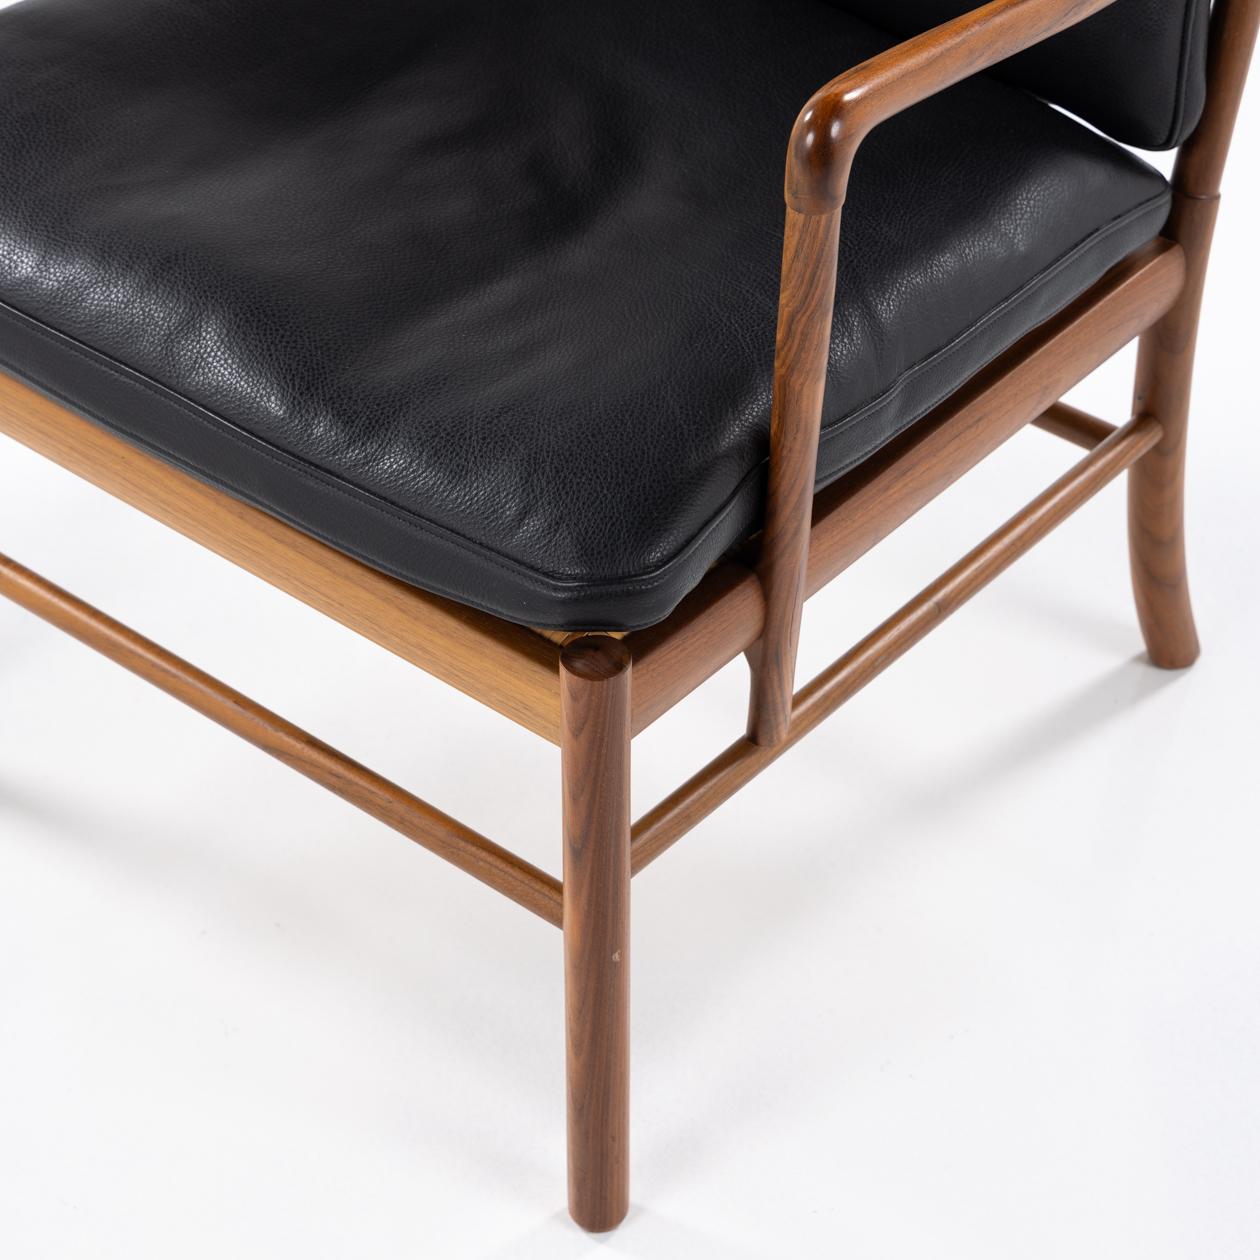 Danish PJ 149 - 'Colonial chair' in black leather and walnut by Ole Wanscher For Sale